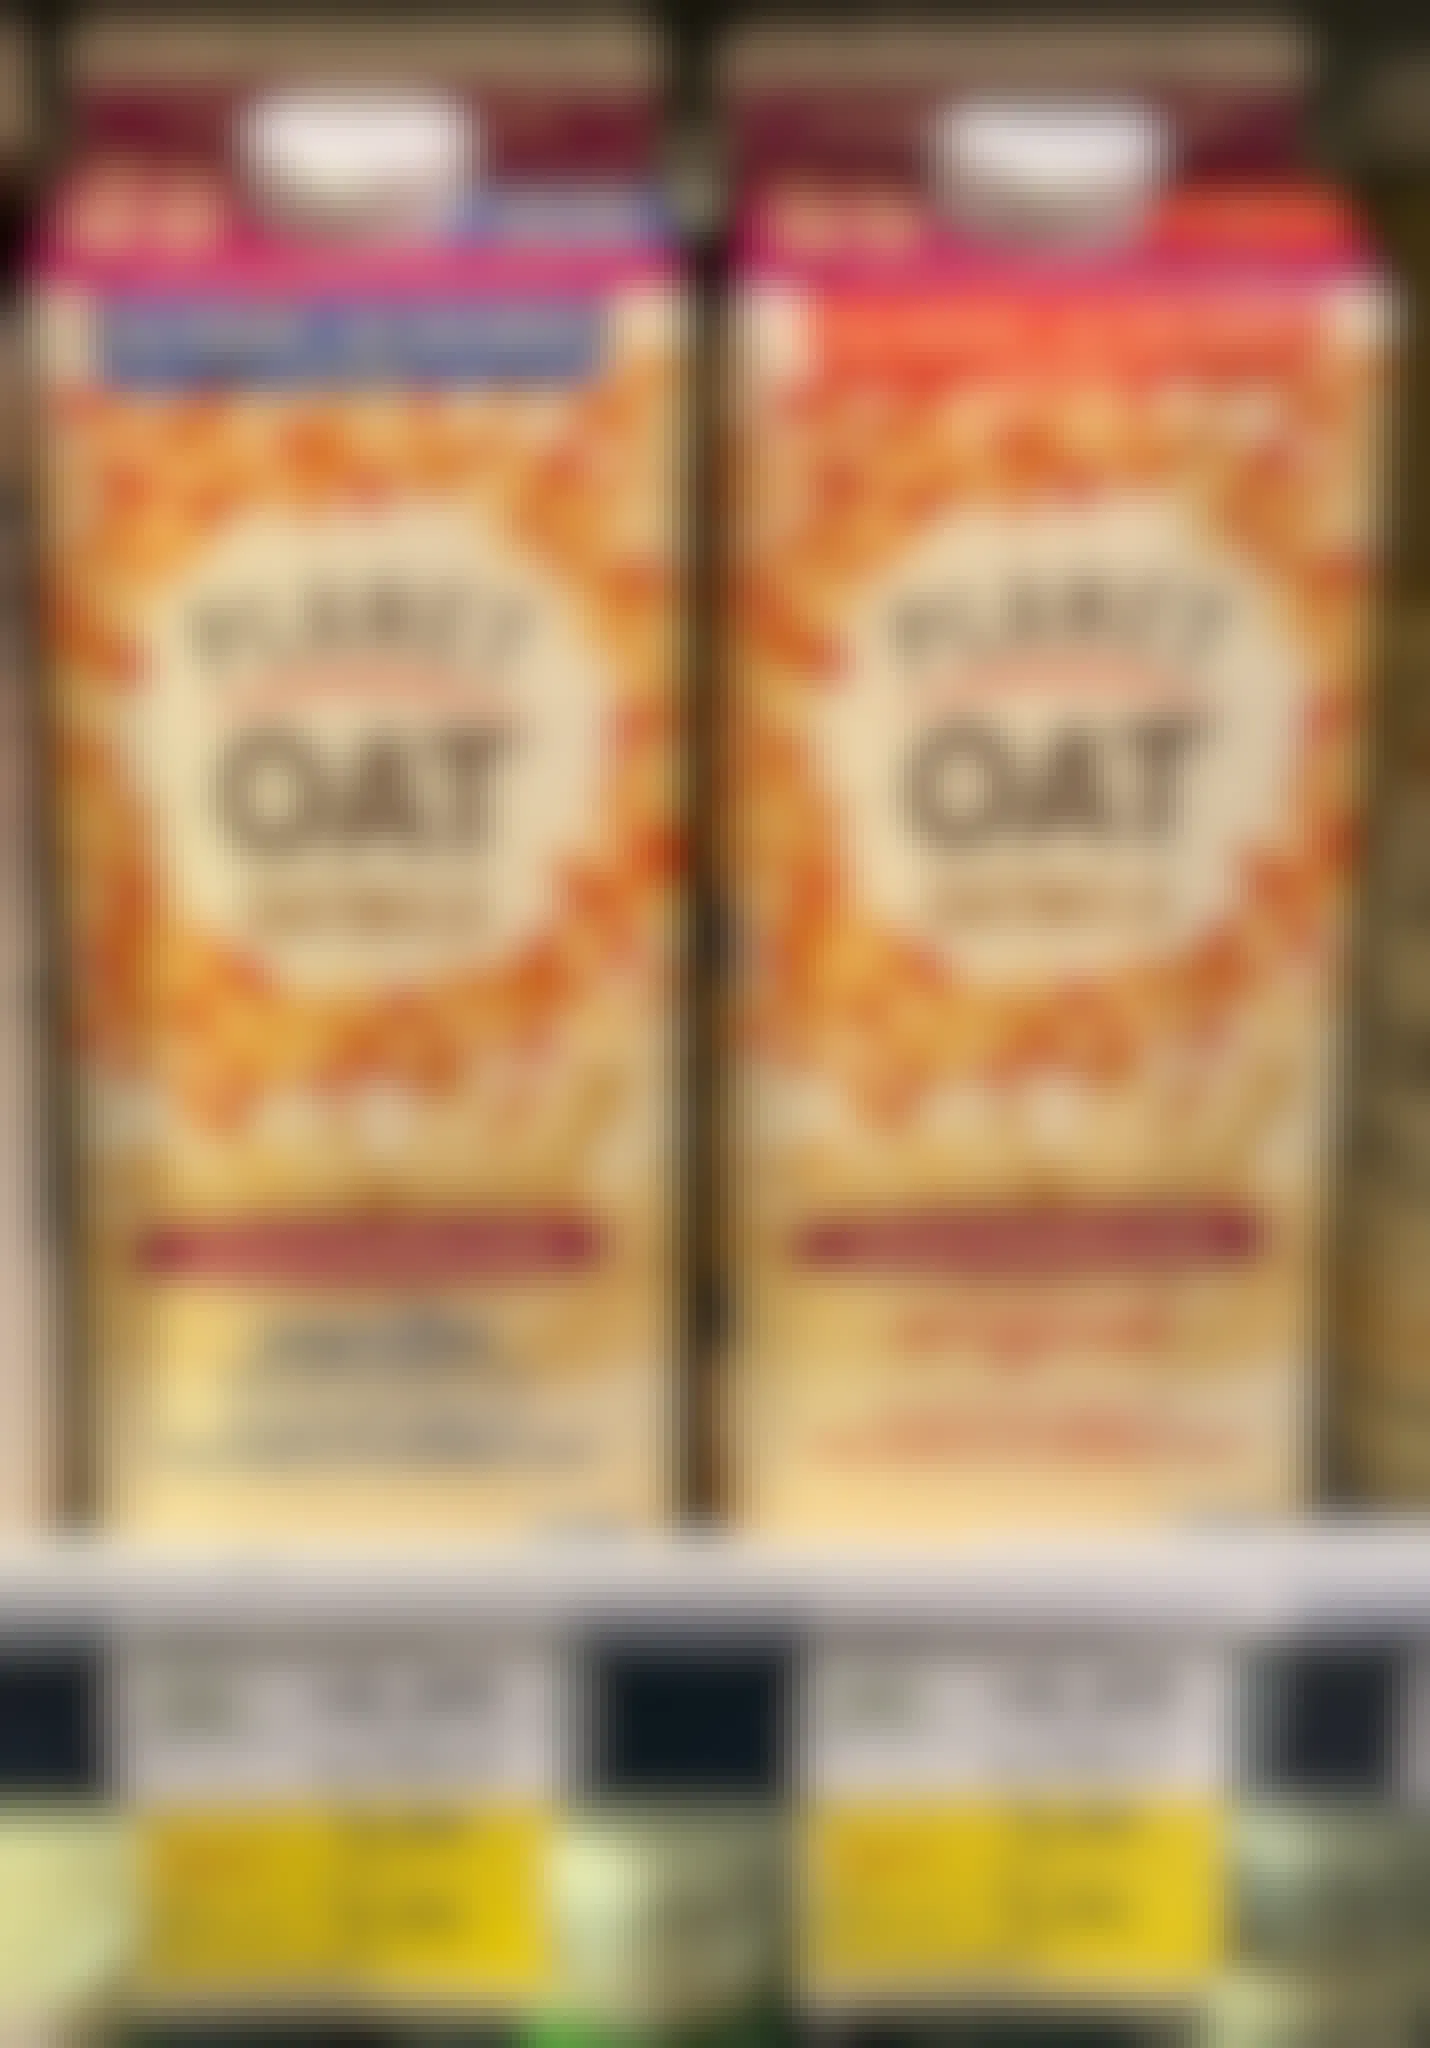 oatmilk at whole foods